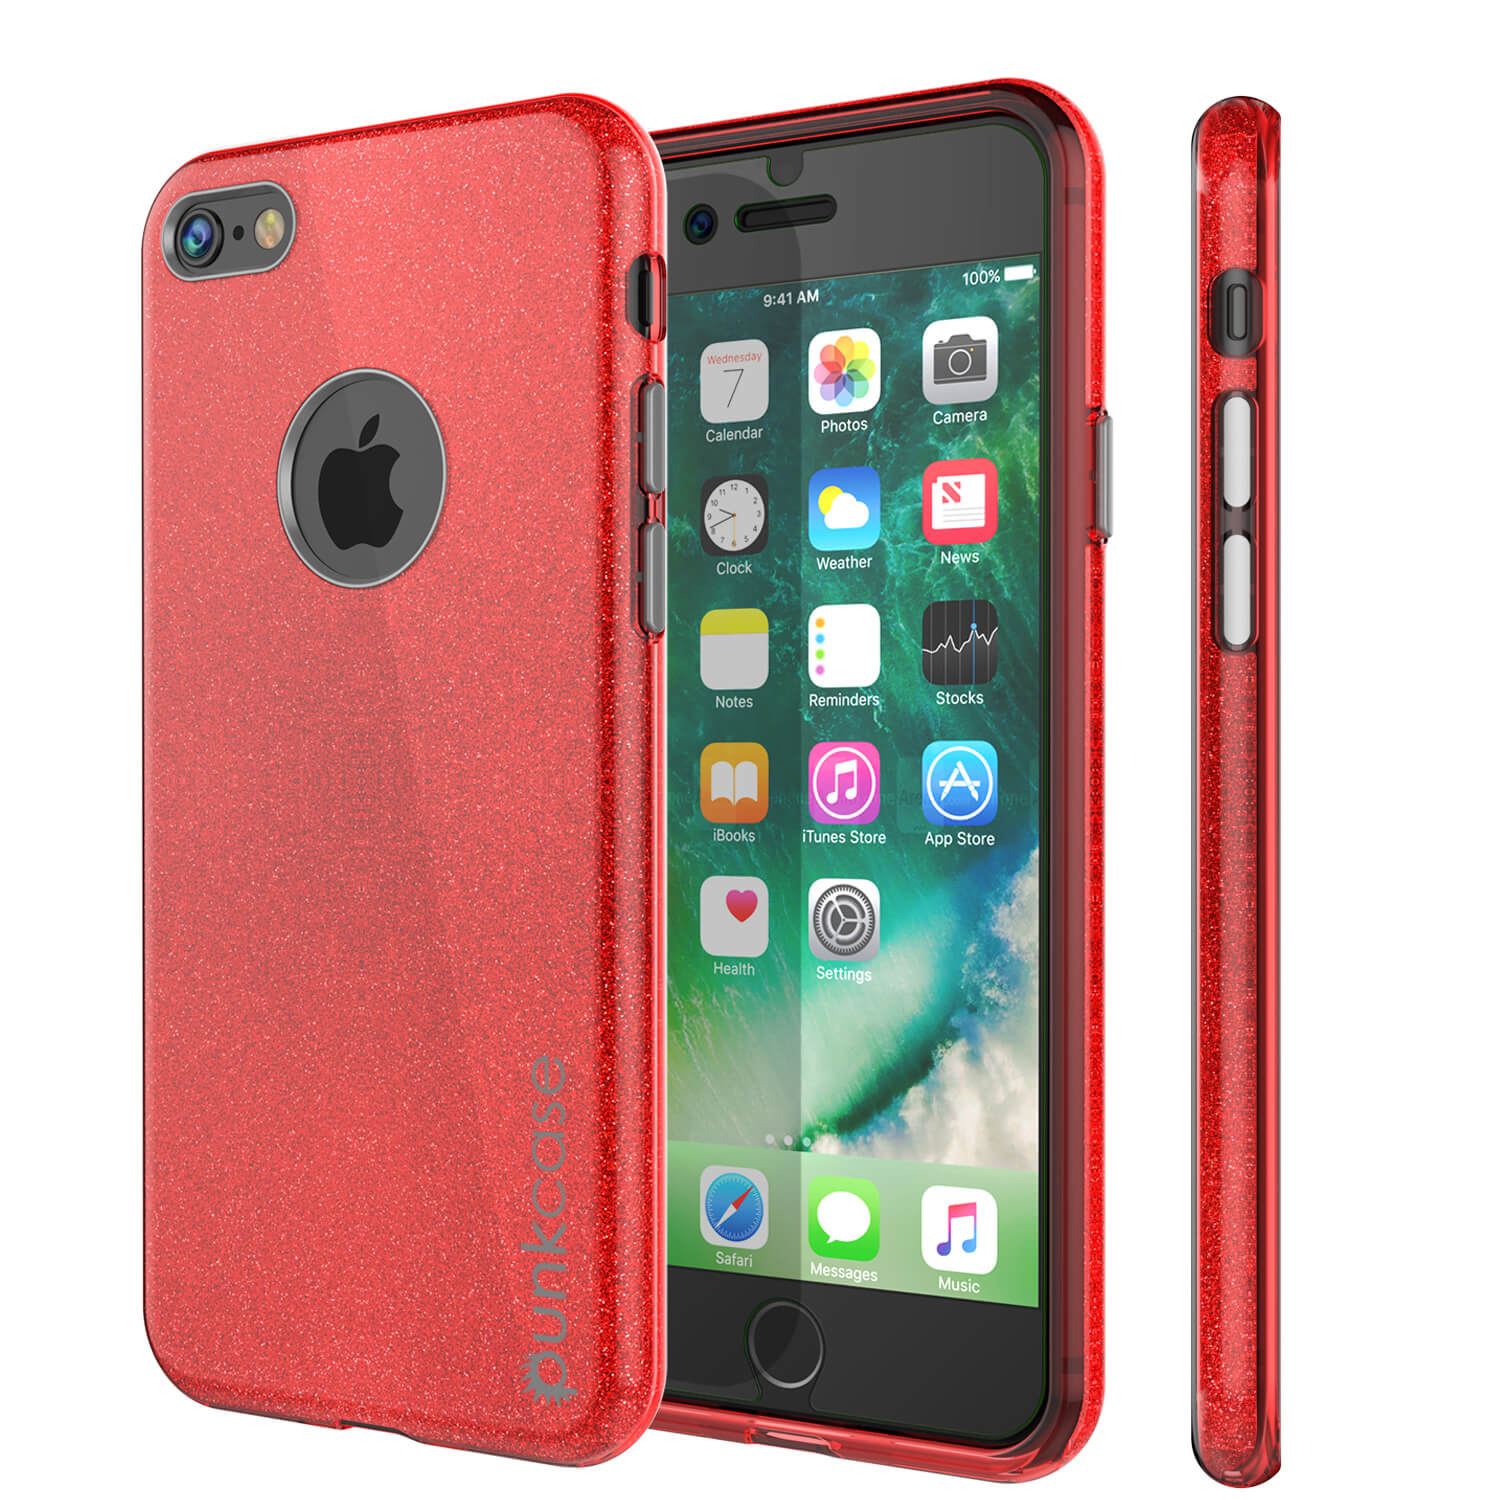 iPhone 6s/6 Case PunkCase Galactic Red Slim w/ Tempered Glass | Lifetime Warranty